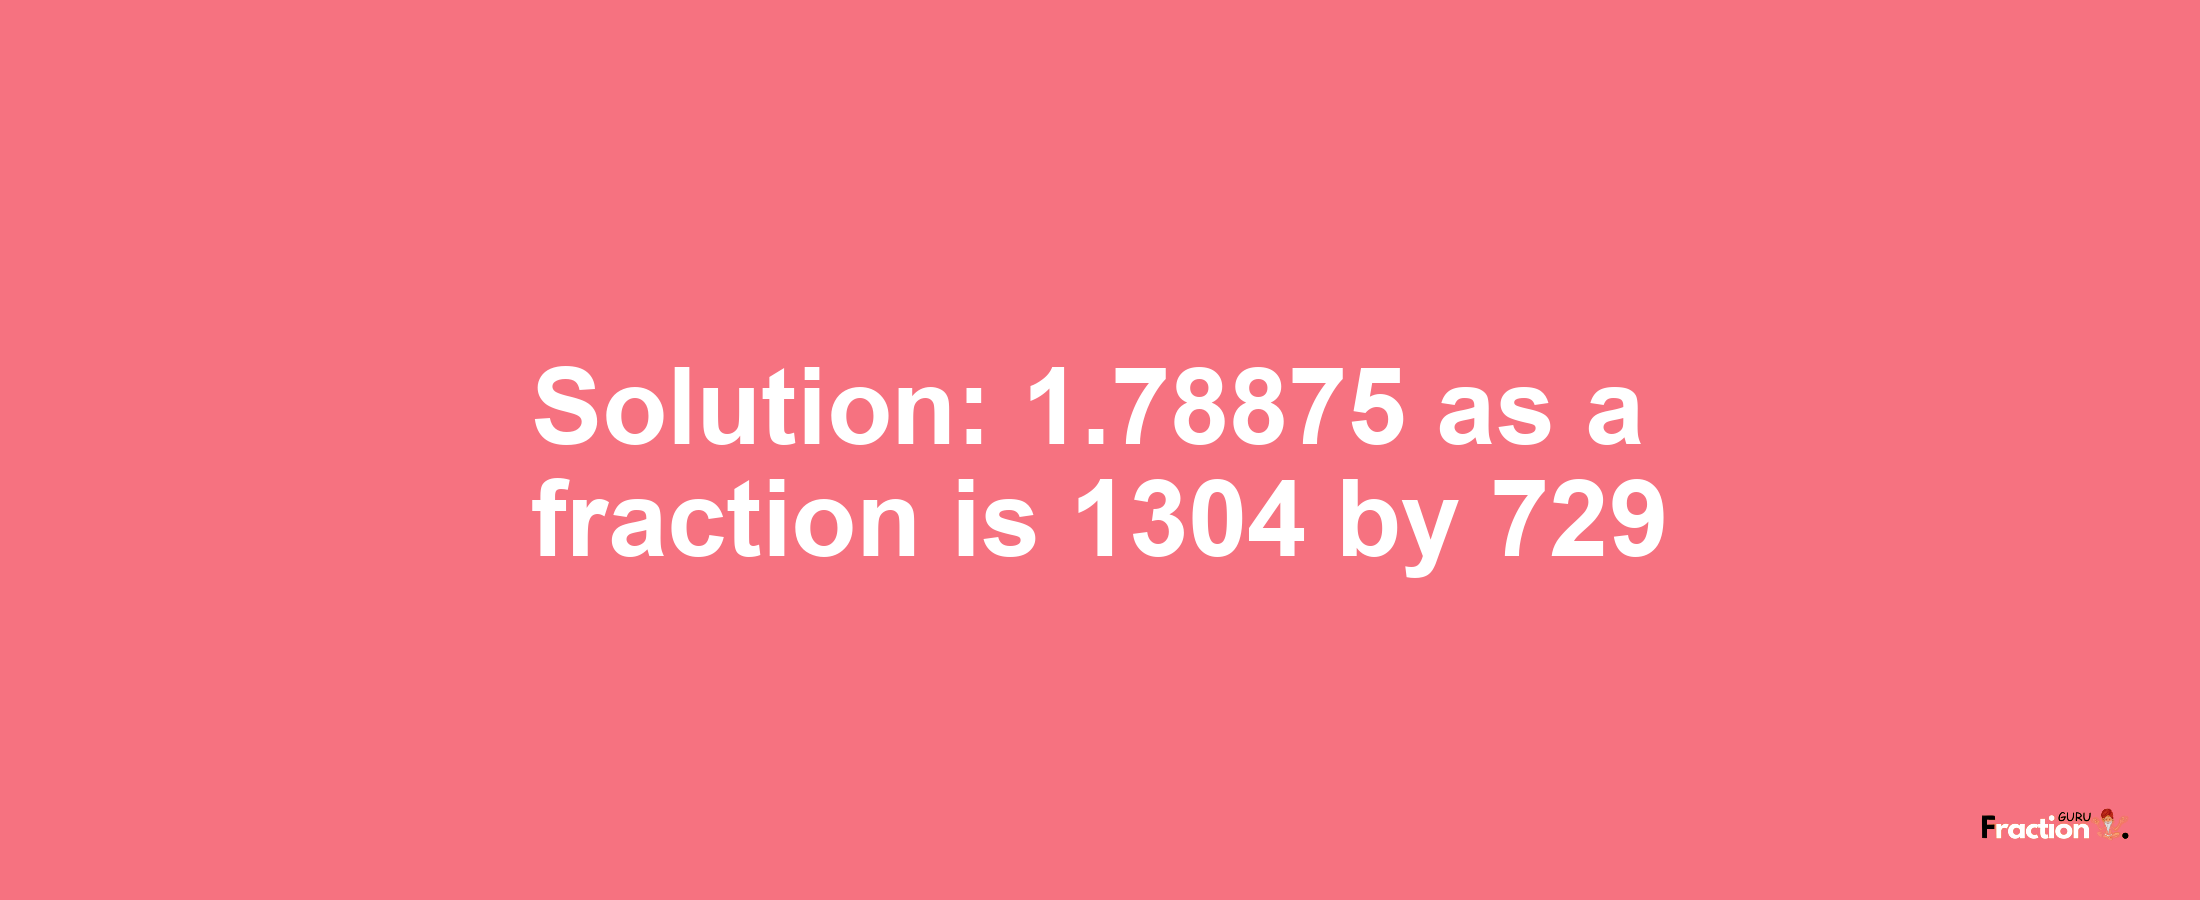 Solution:1.78875 as a fraction is 1304/729